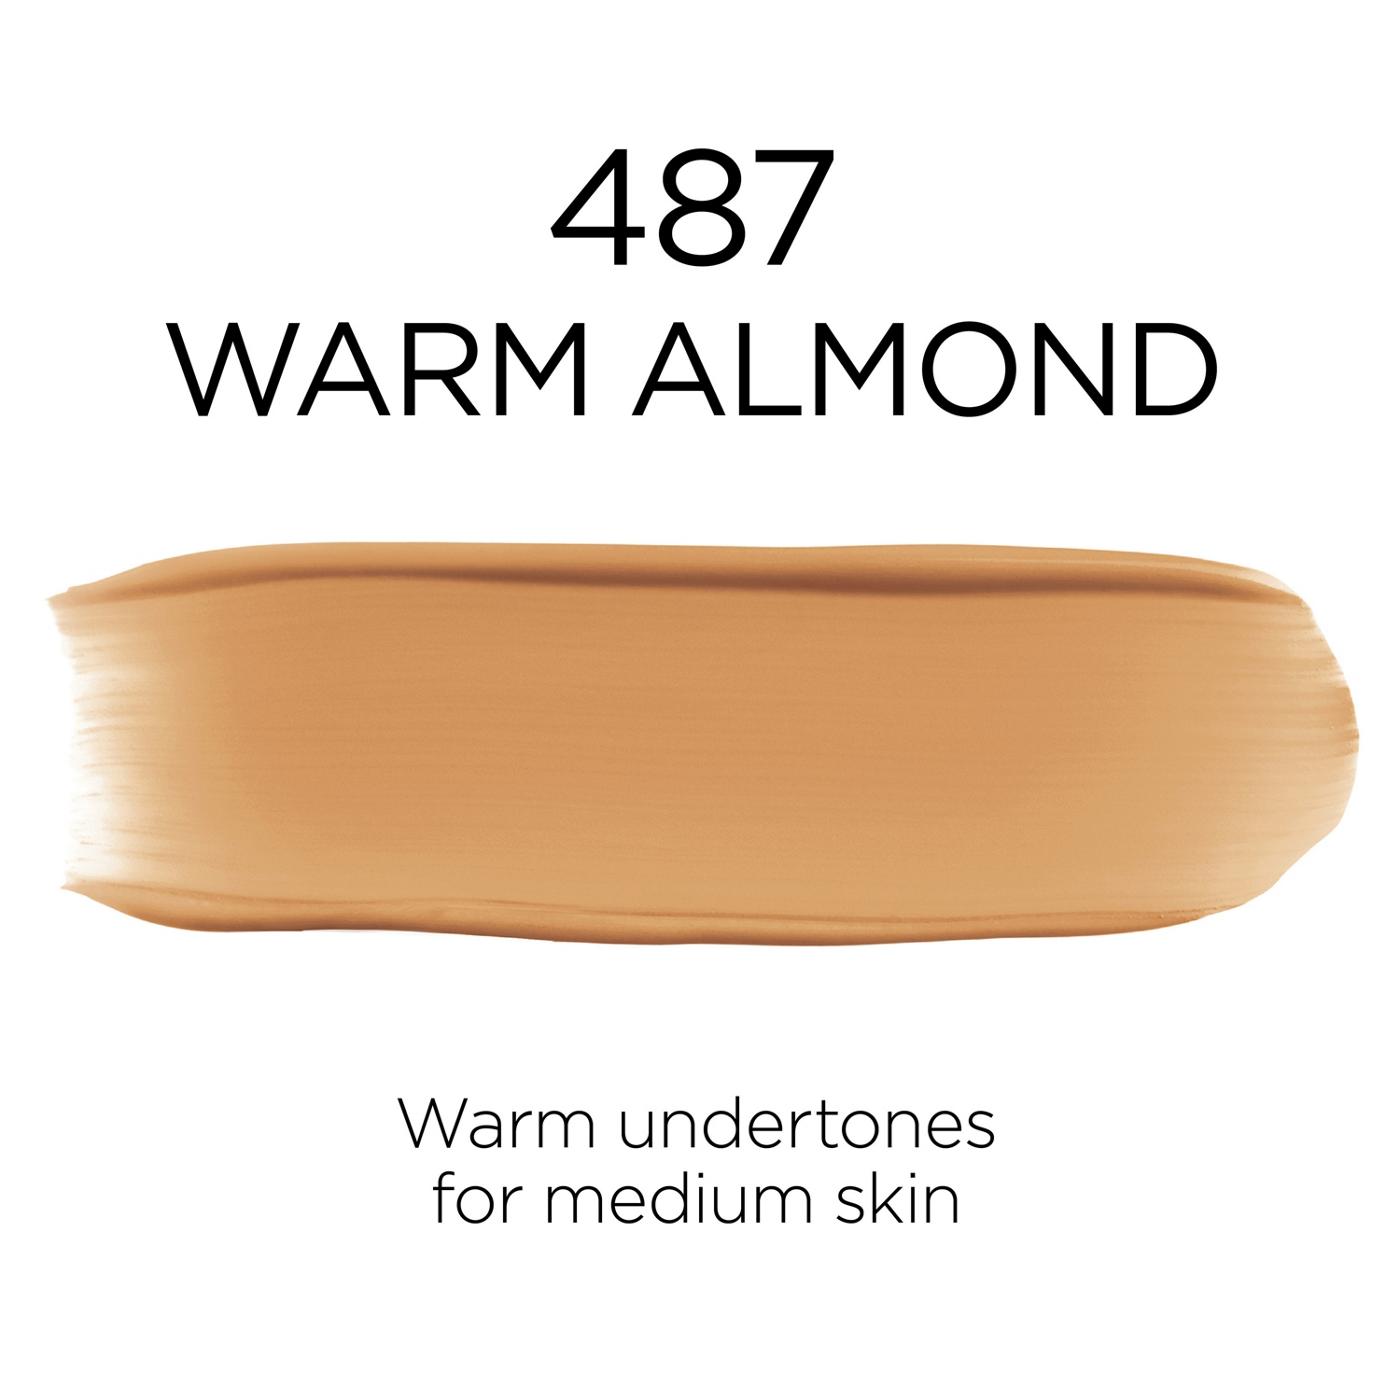 L'Oréal Paris Infallible Up to 24 Hour Fresh Wear Foundation - Lightweight Warm Almond; image 7 of 8